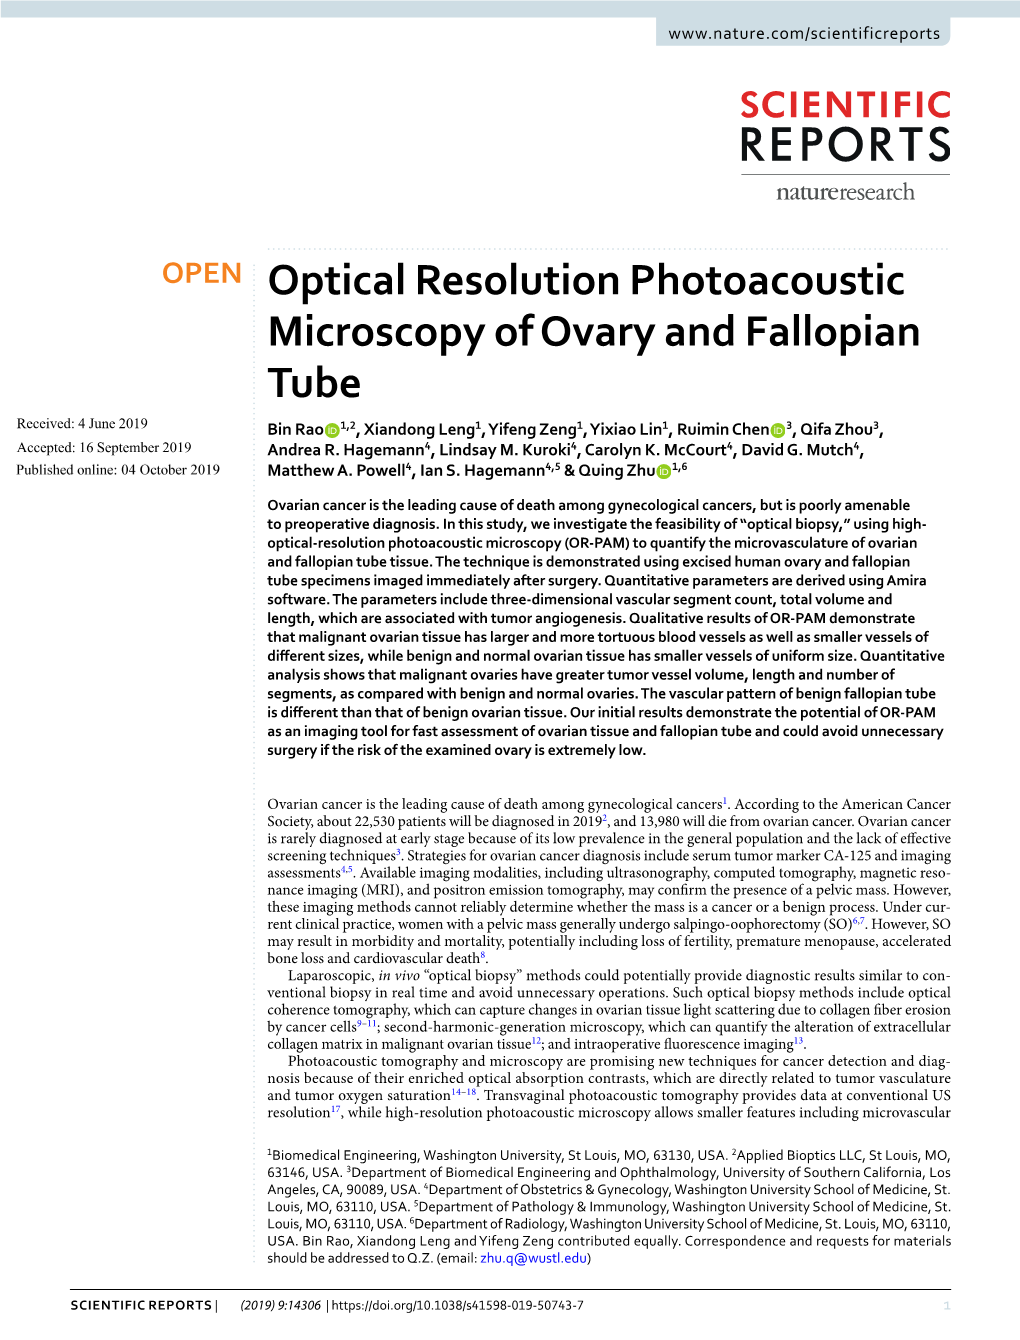 Optical Resolution Photoacoustic Microscopy of Ovary and Fallopian